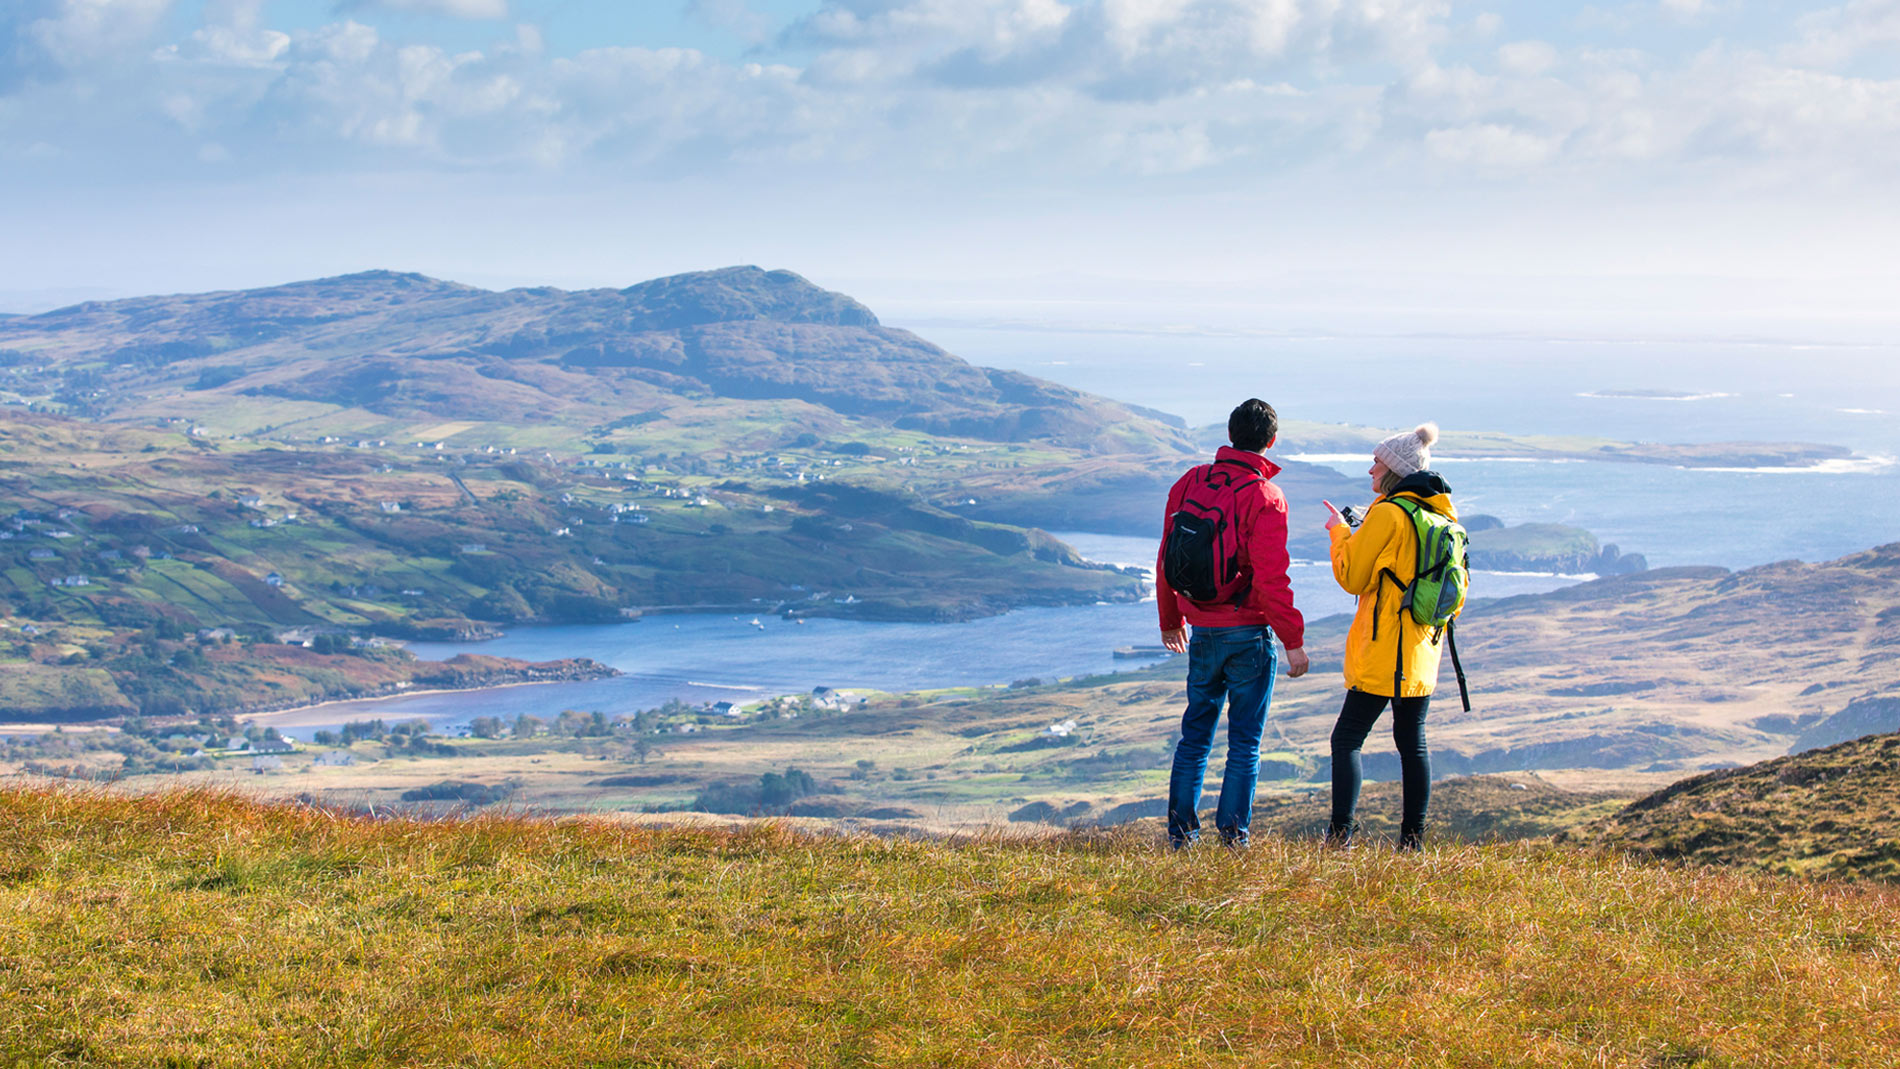 10 Tips For Planning The Perfect Trip To Ireland